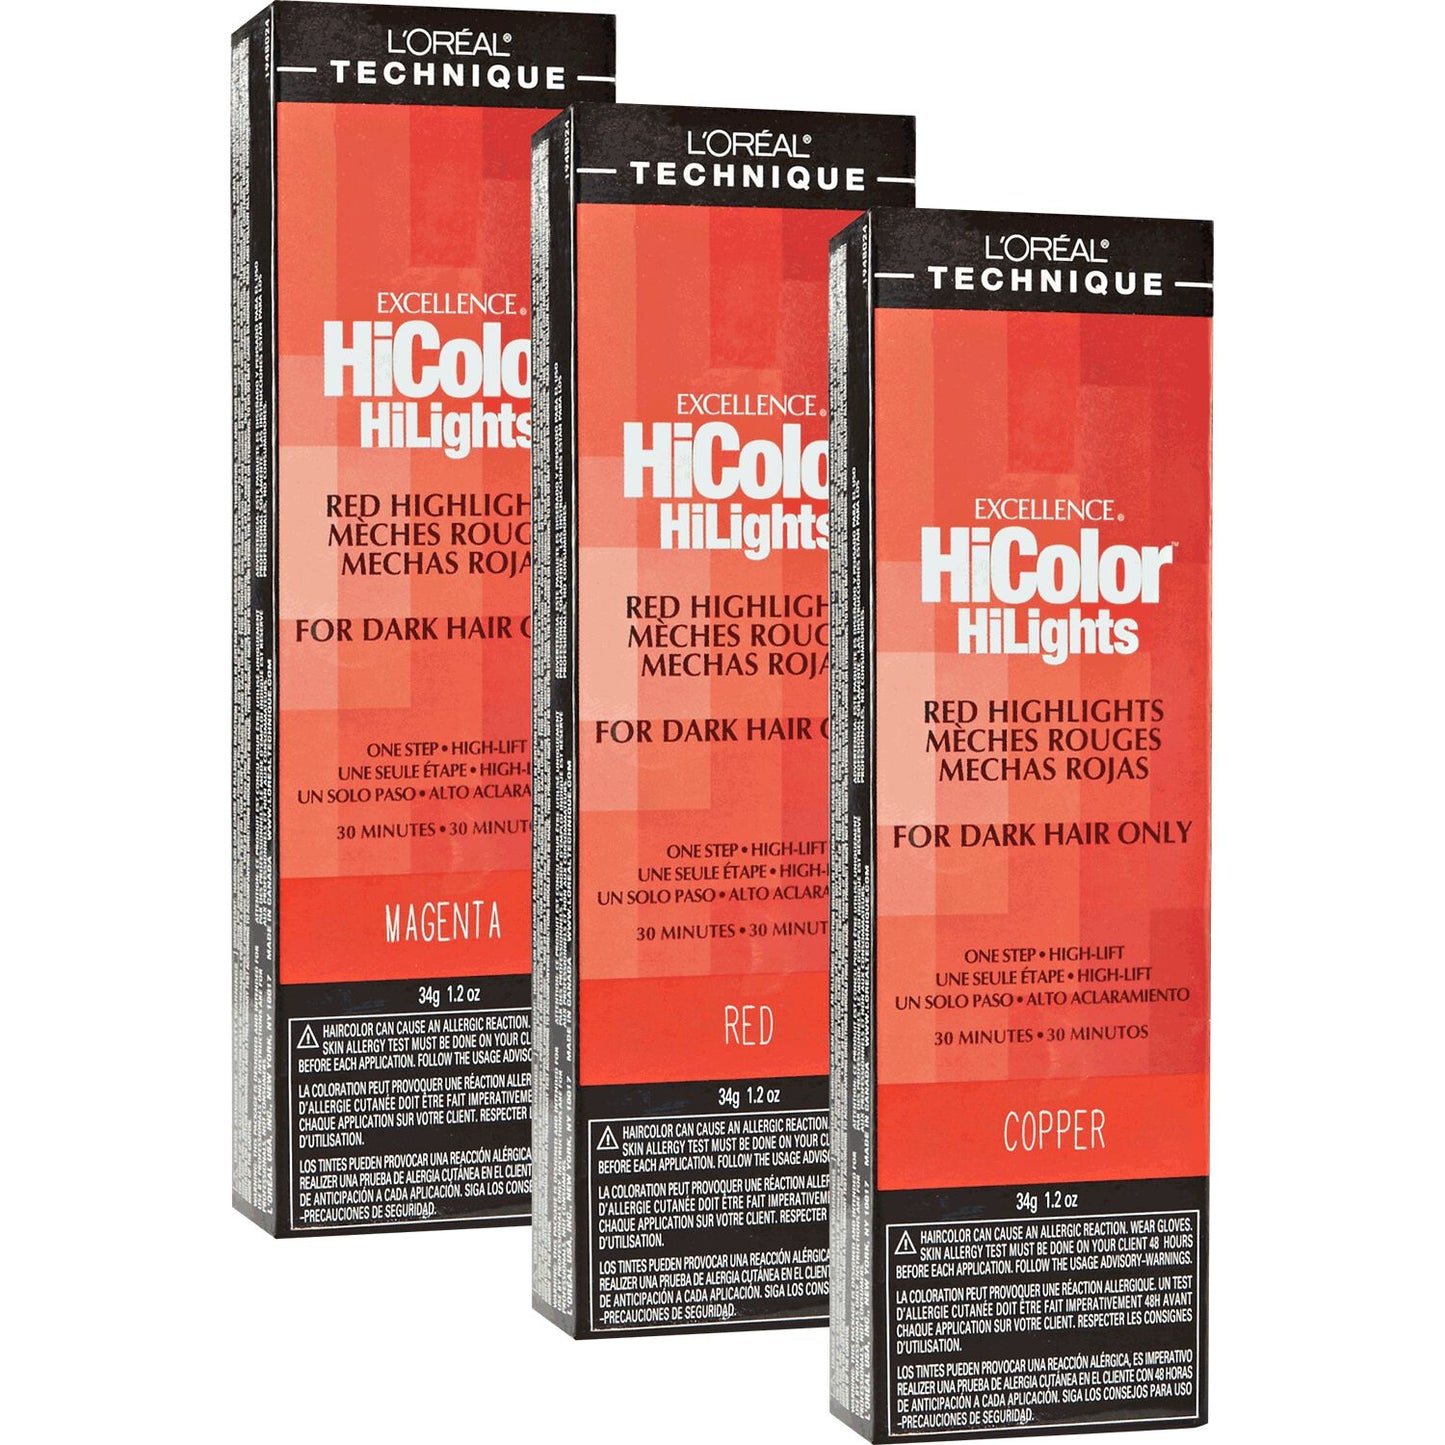 Loreal HiColor Highlights Red